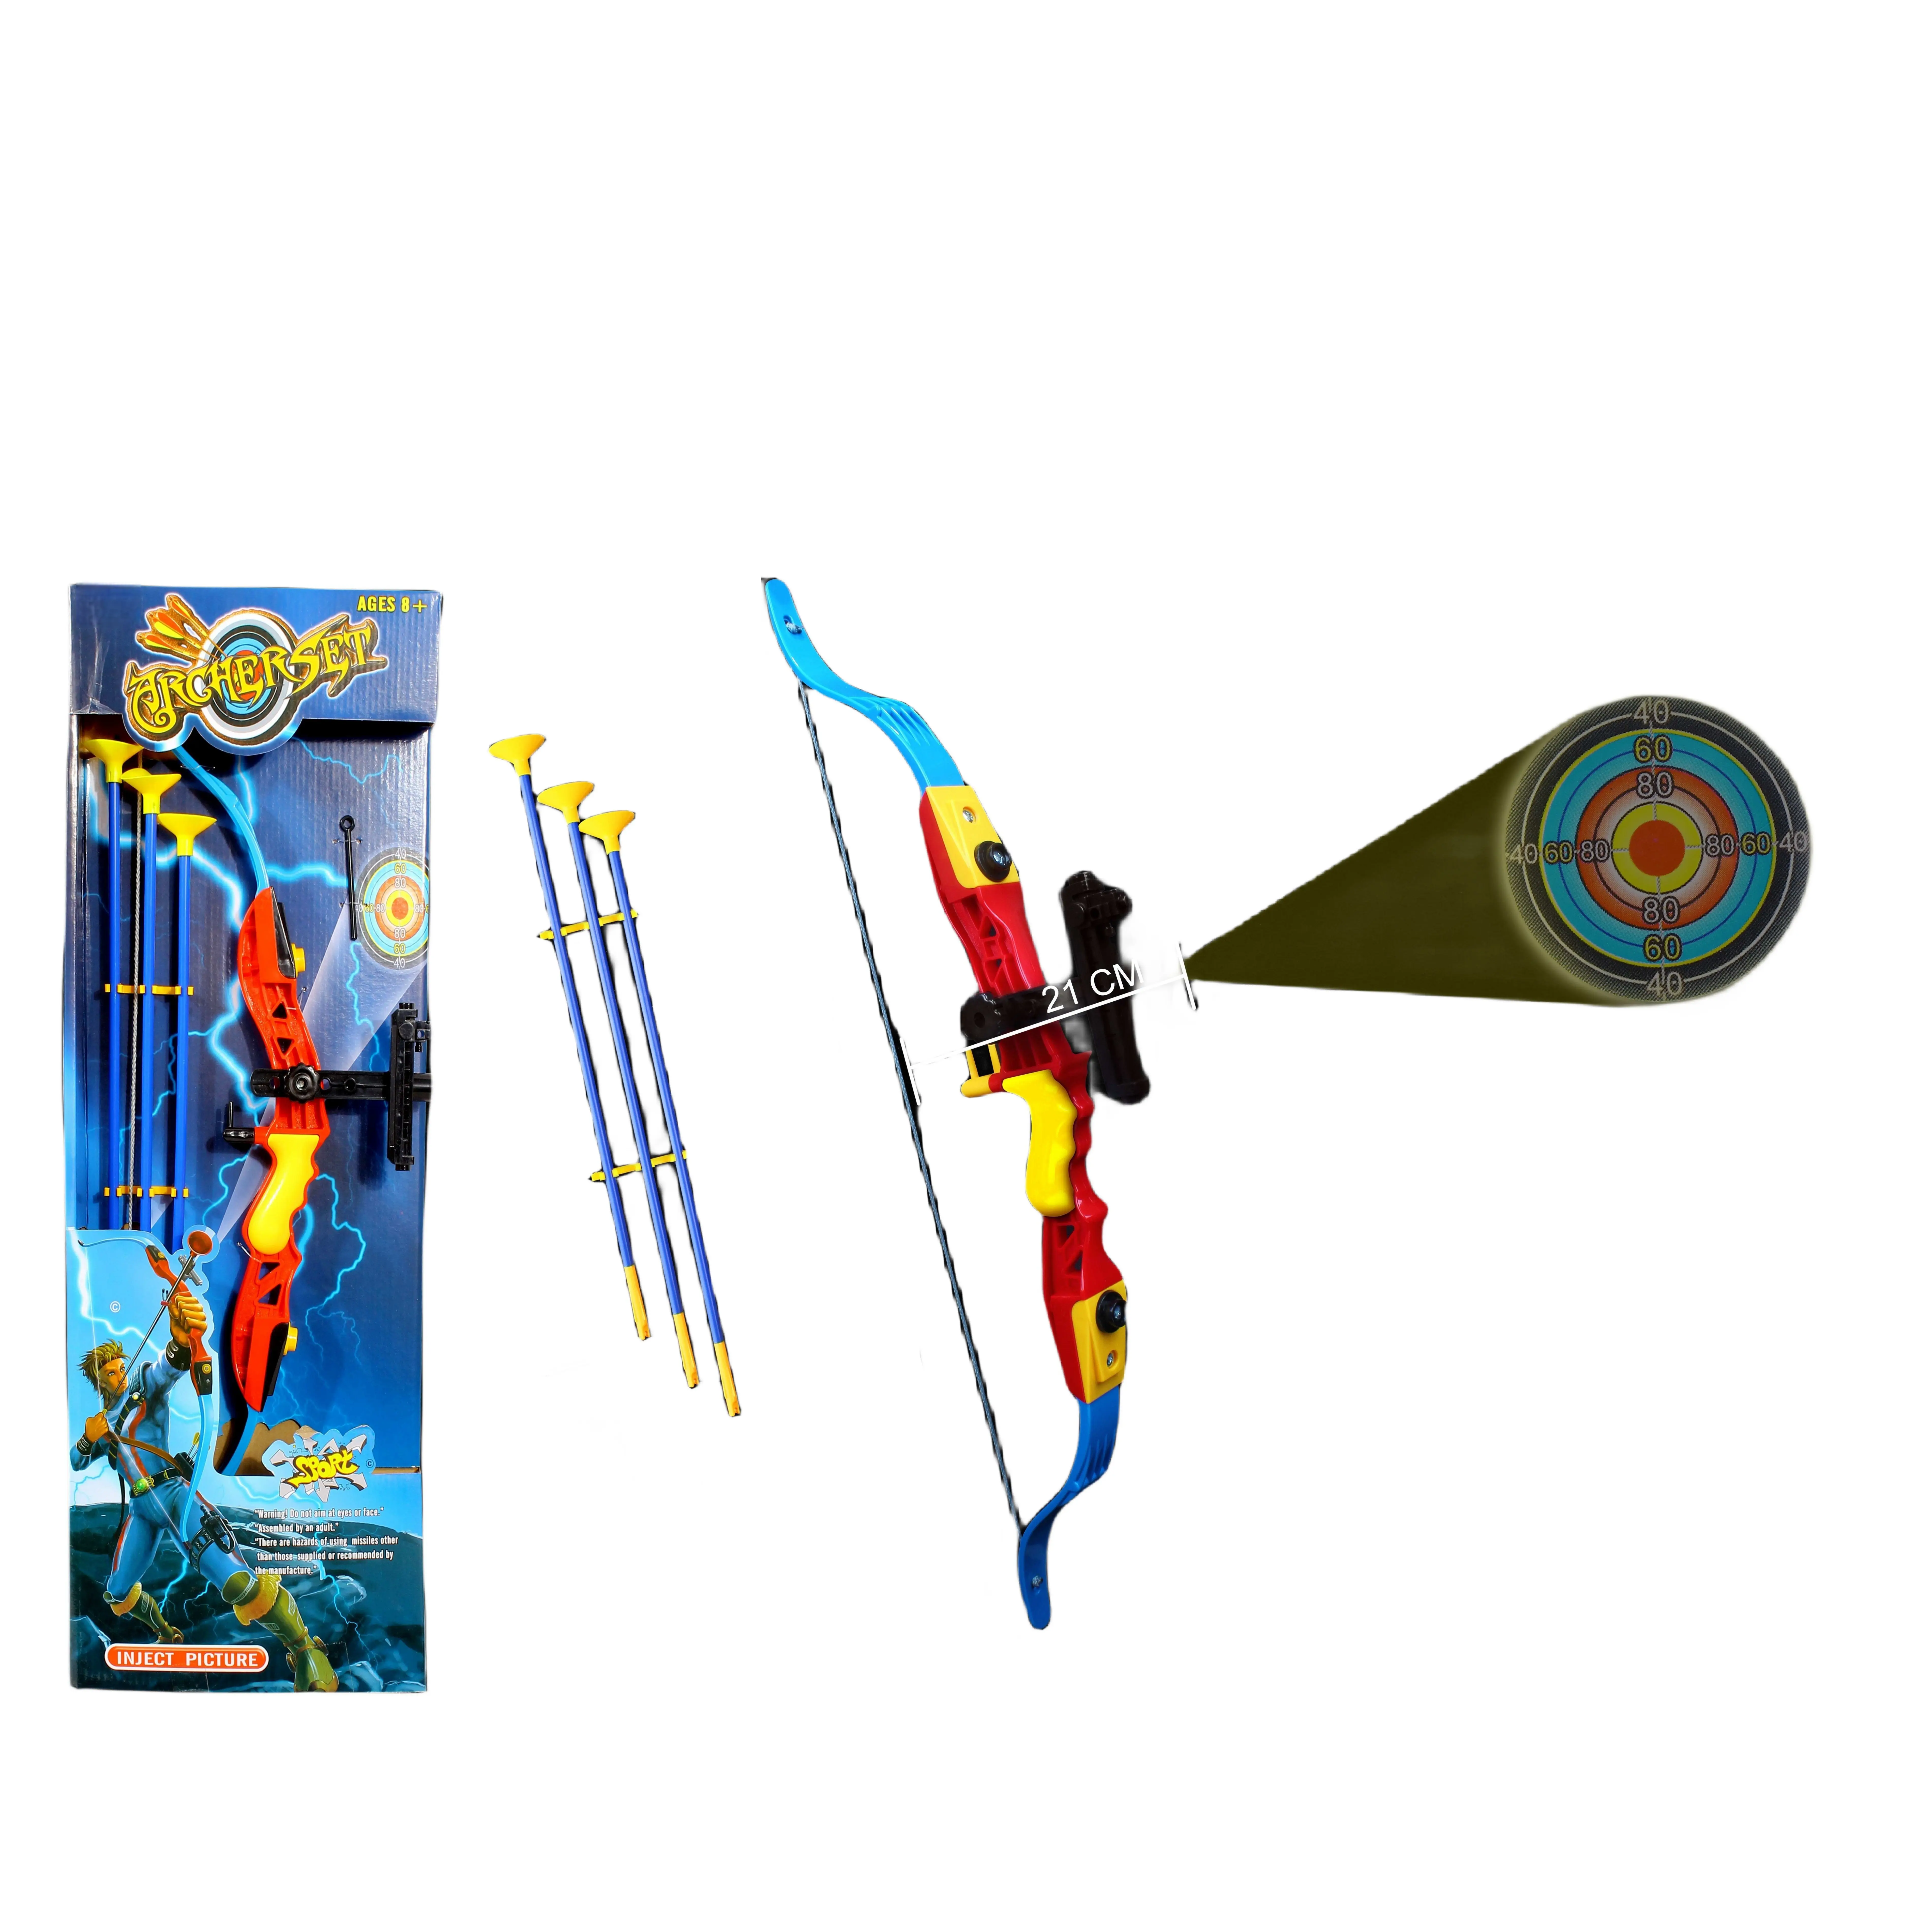 New Recurve Slingshot Bow Target Shooting Arrow Gift Game Kids Projector Toys Archery Compound Bow And Arrow Hunting